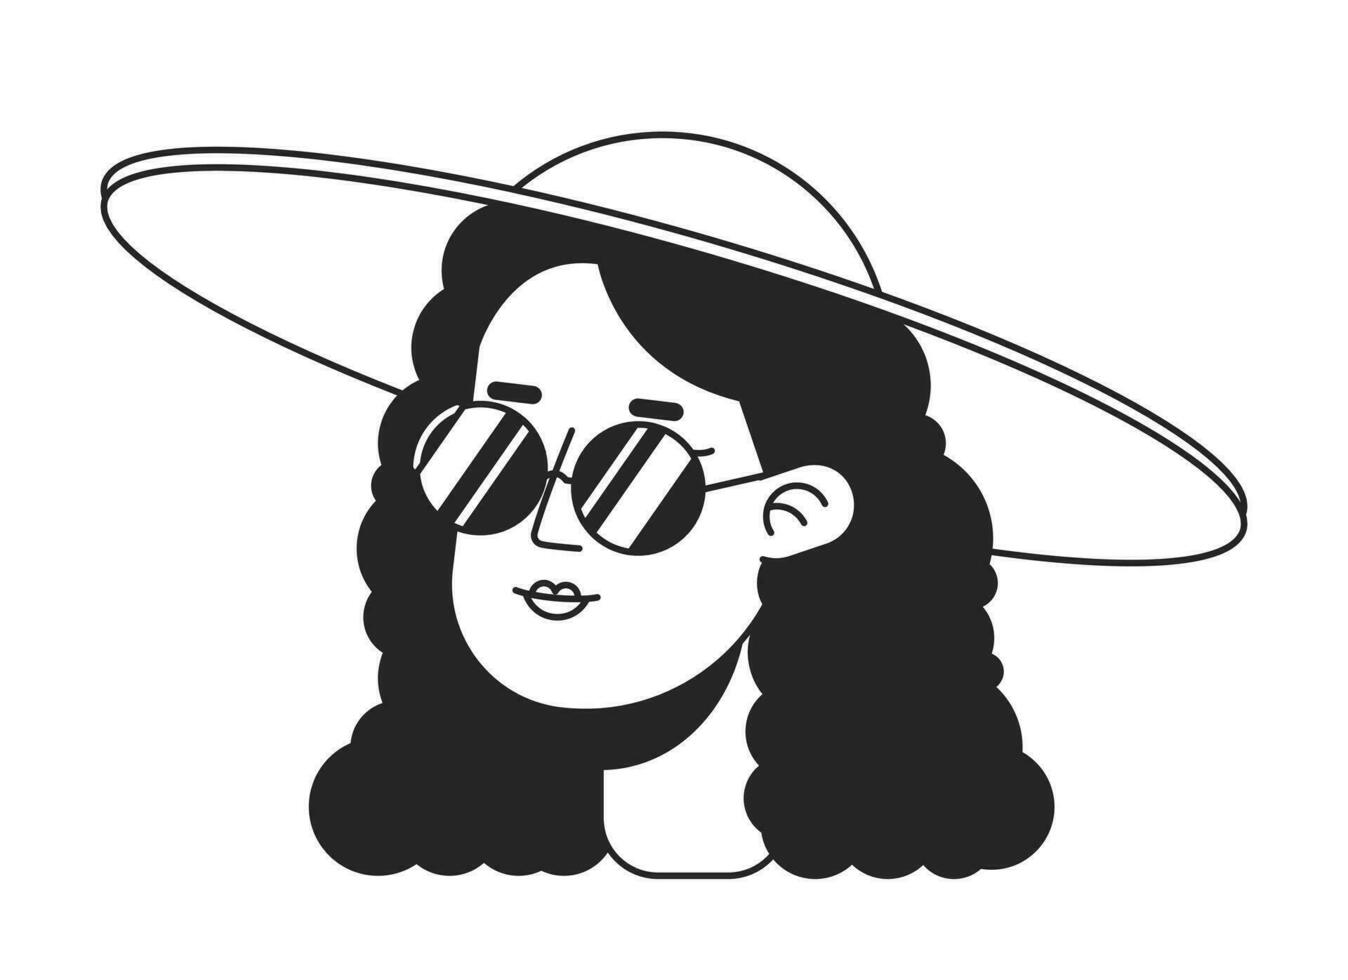 Sunglasses woman in summer hat monochrome flat linear character head. Caucasian curly hair lady. Editable outline hand drawn human face icon. 2D cartoon spot vector avatar illustration for animation